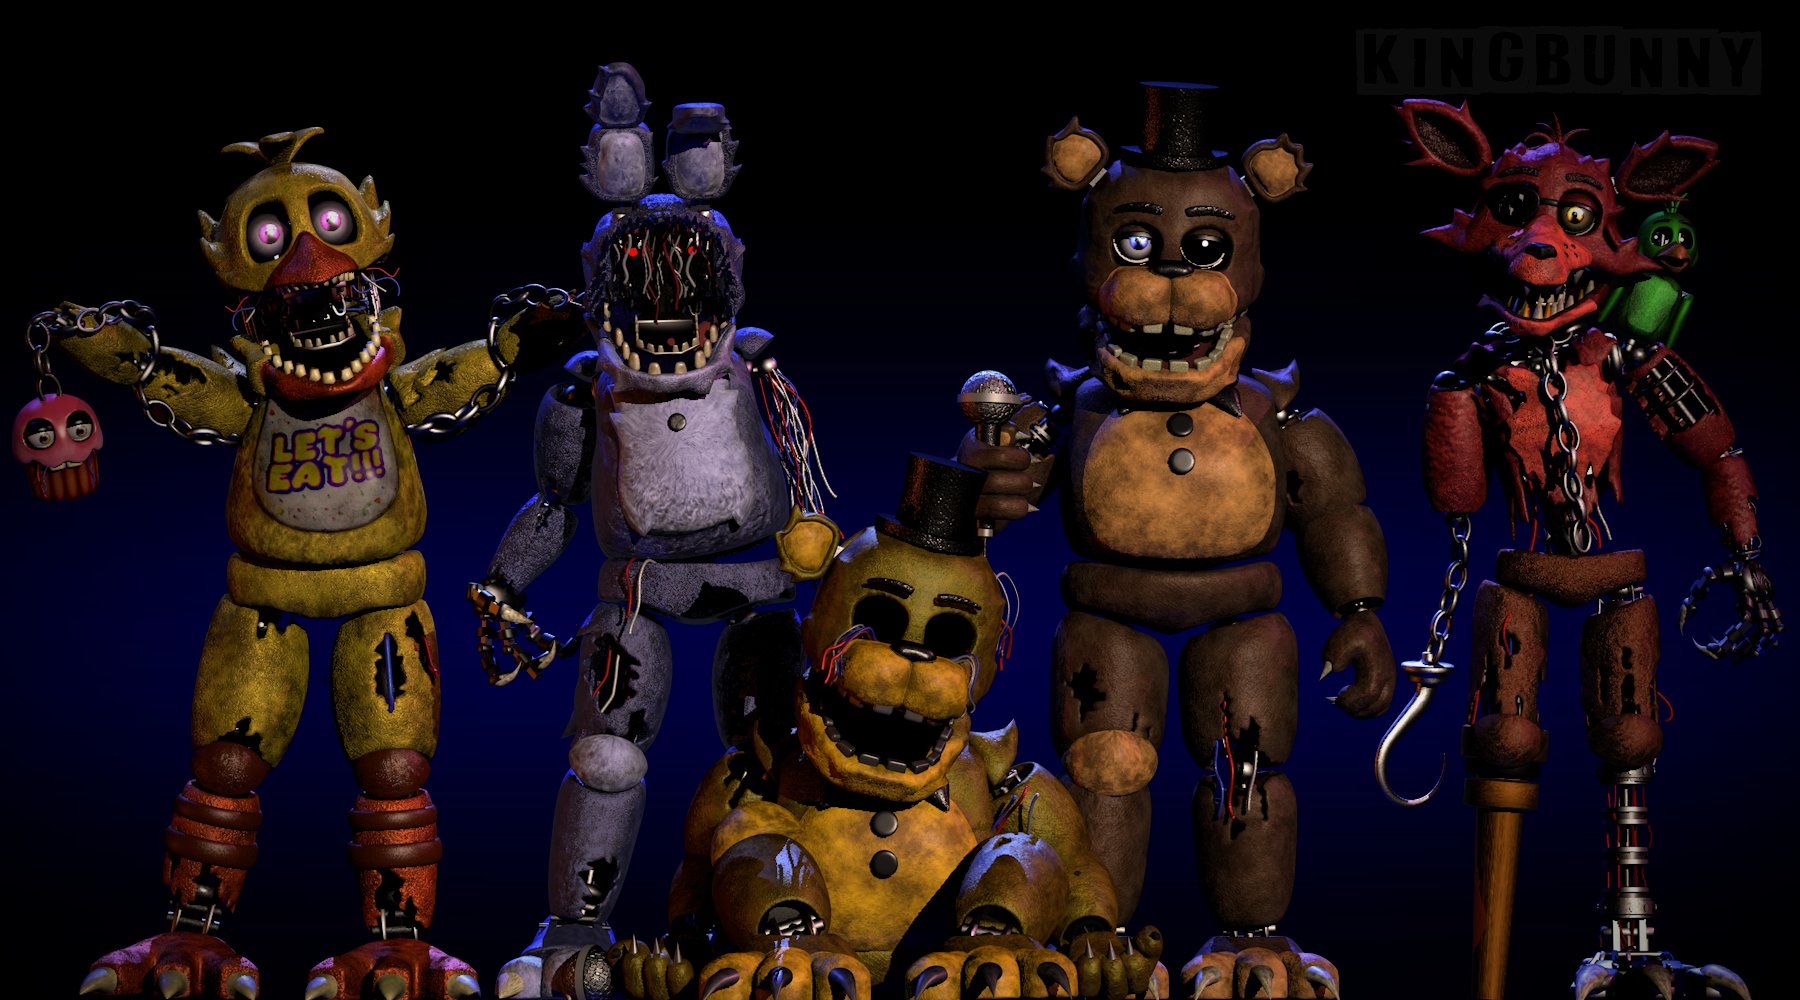 WillyWill on X: (SFM) FNaF2 Withered Freddy in Office Original Models by:  @real_scawthon @SteelWoolStudio Fixes by: @_Alexyssss26 Textures by: Me and  @flaviiusss Materials by: Me as well lol  / X